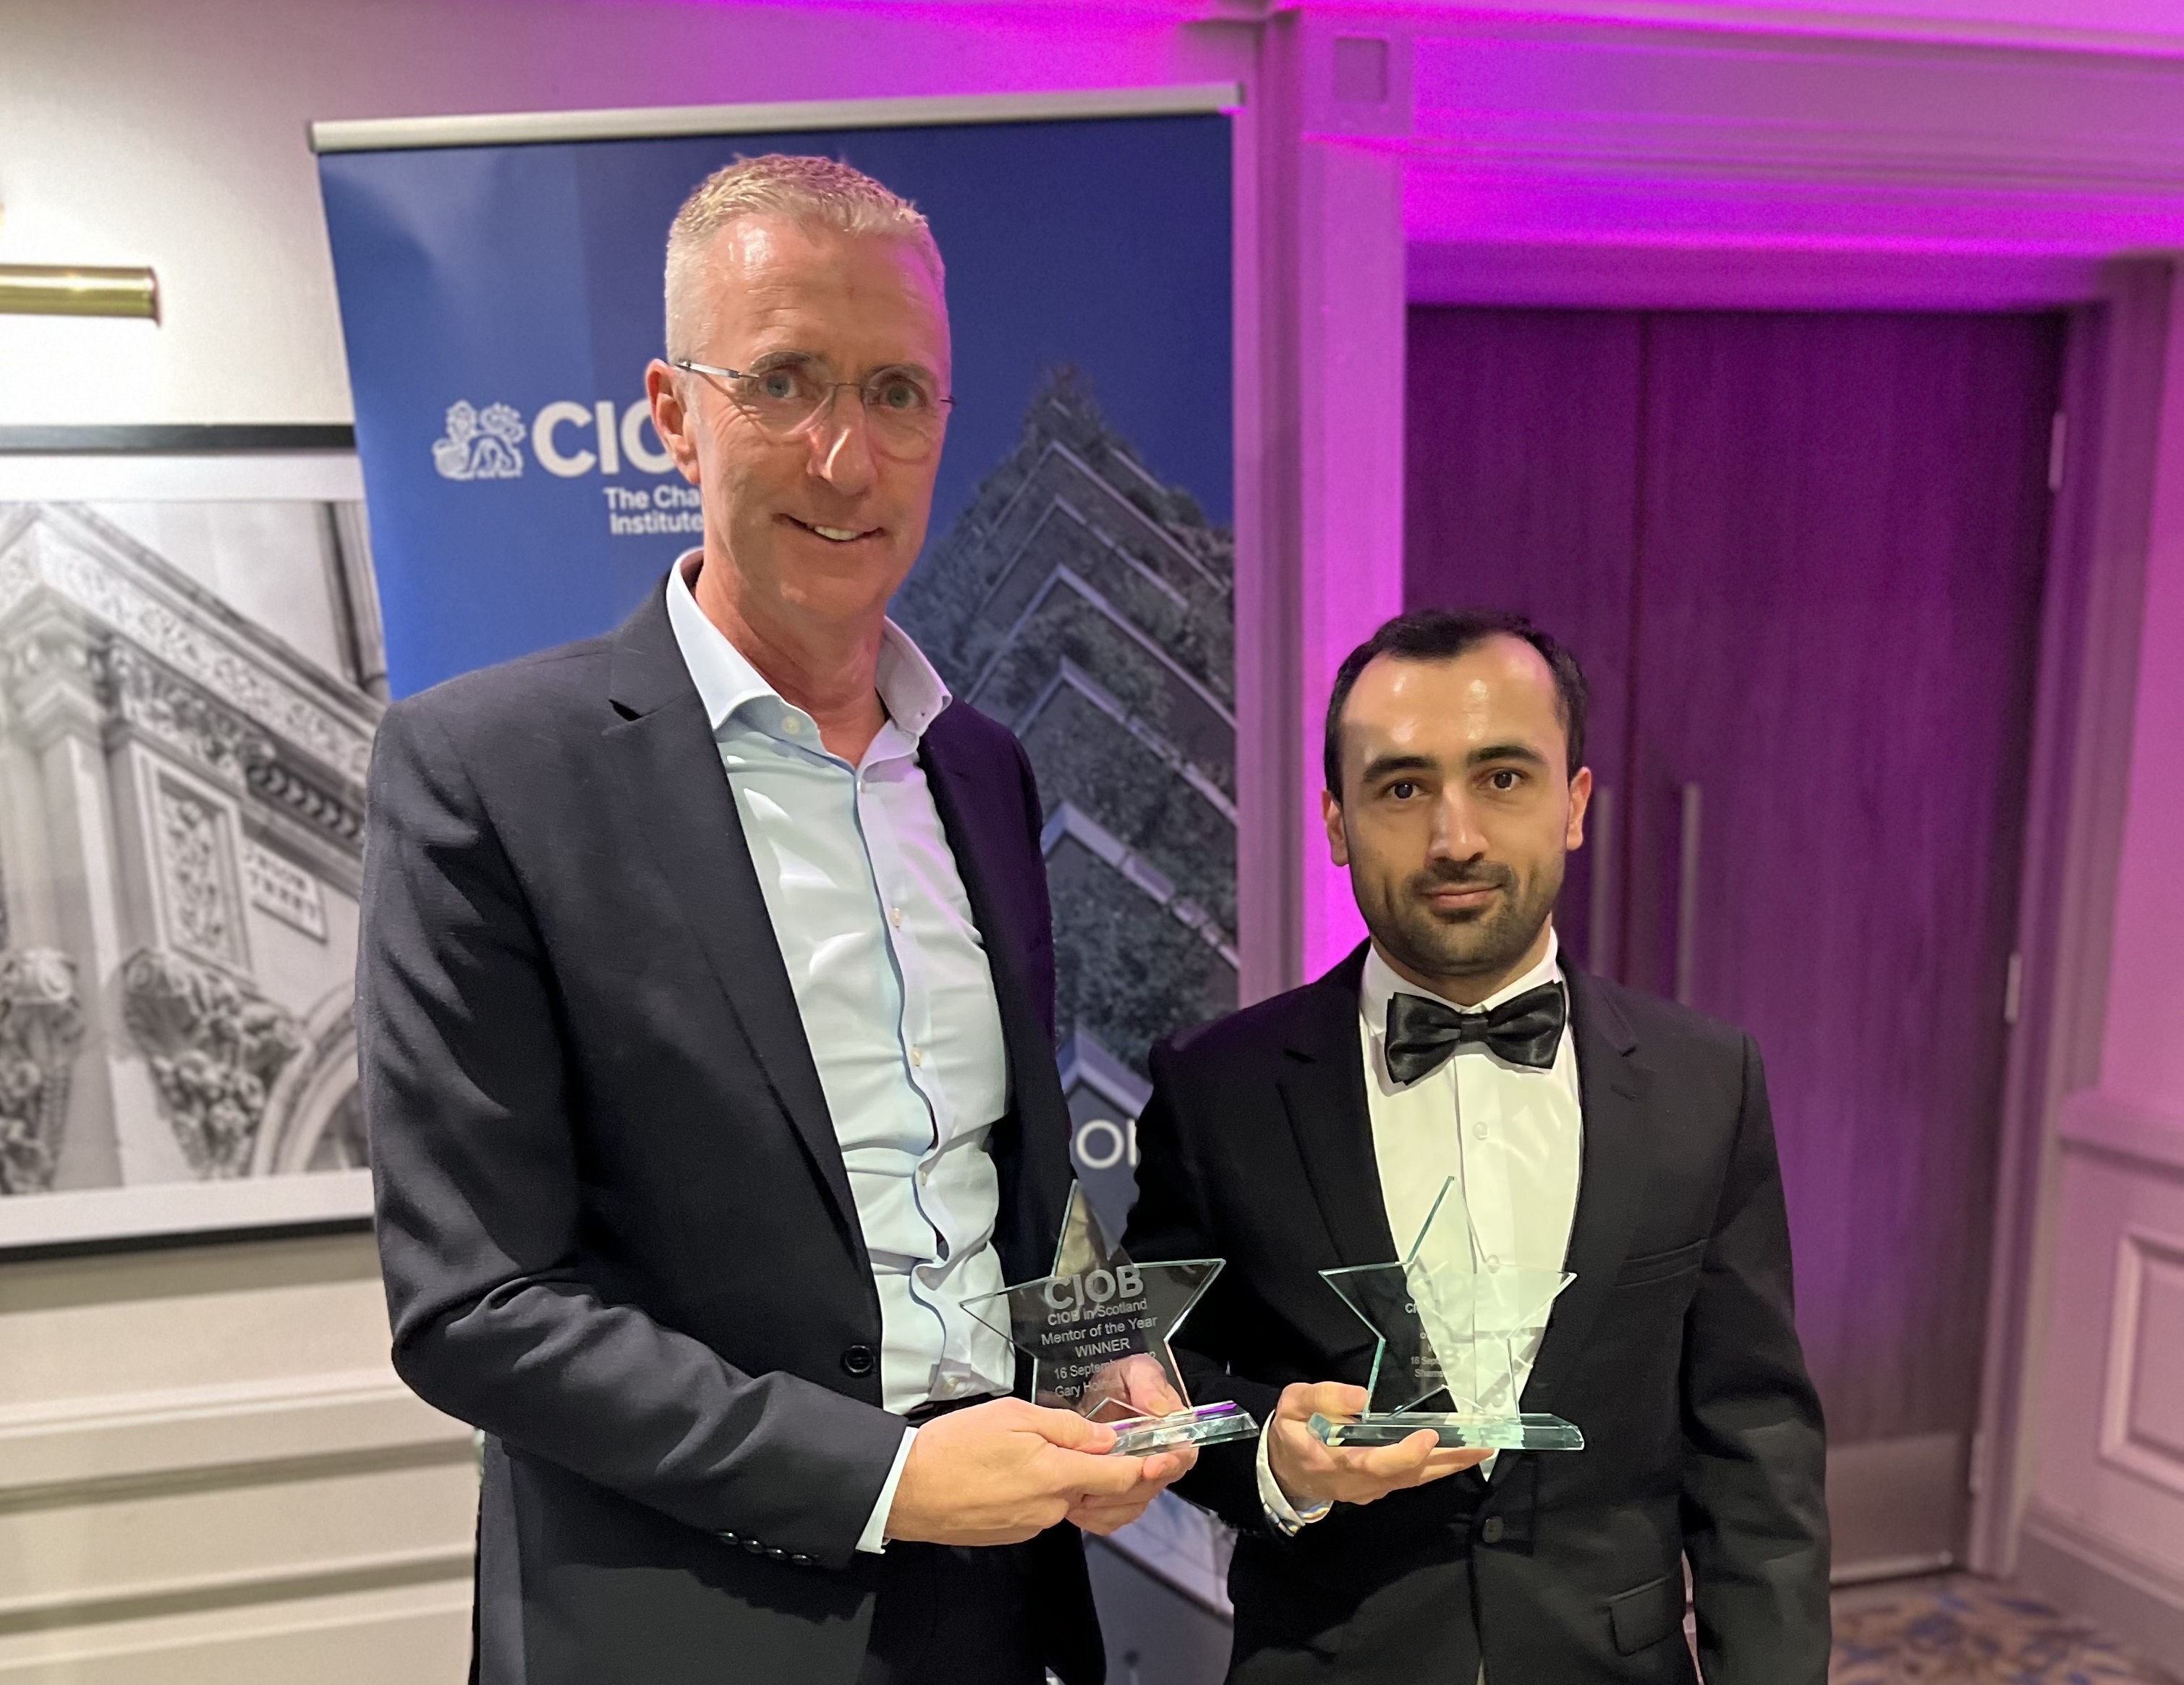 Scotland’s next generation of the construction workforce celebrated by CIOB image